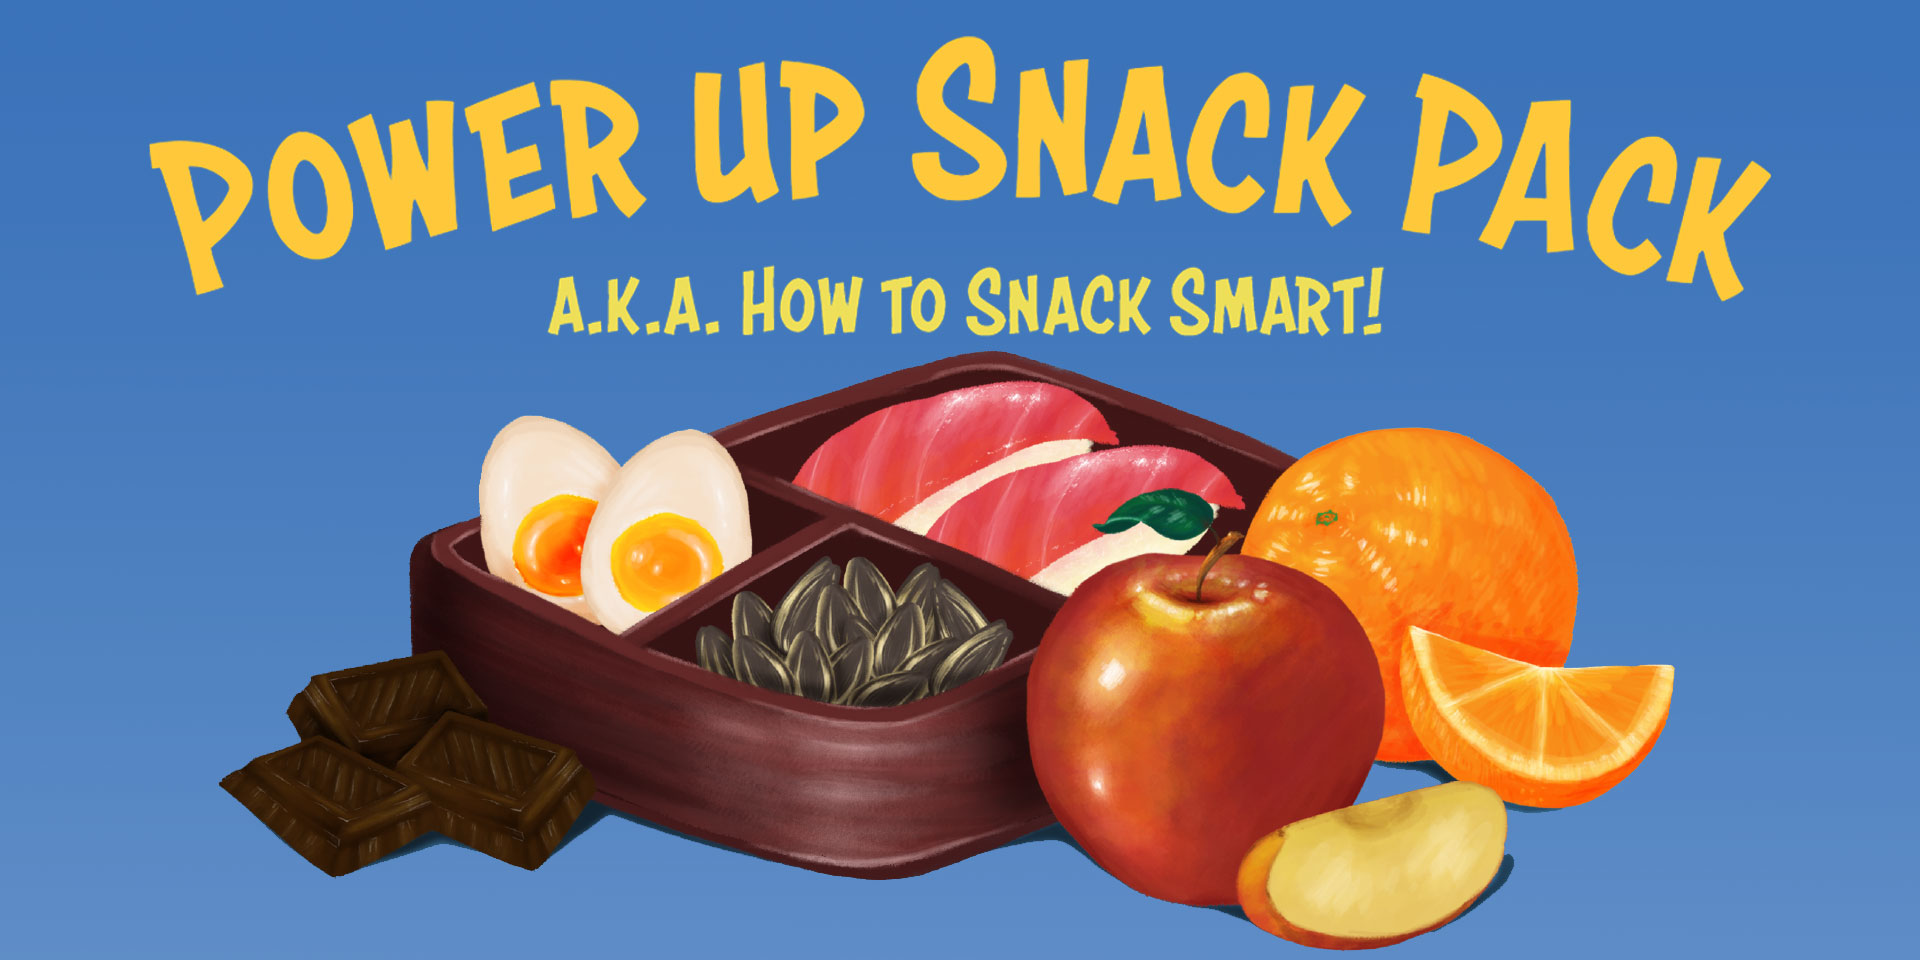 Power up Snack Pack